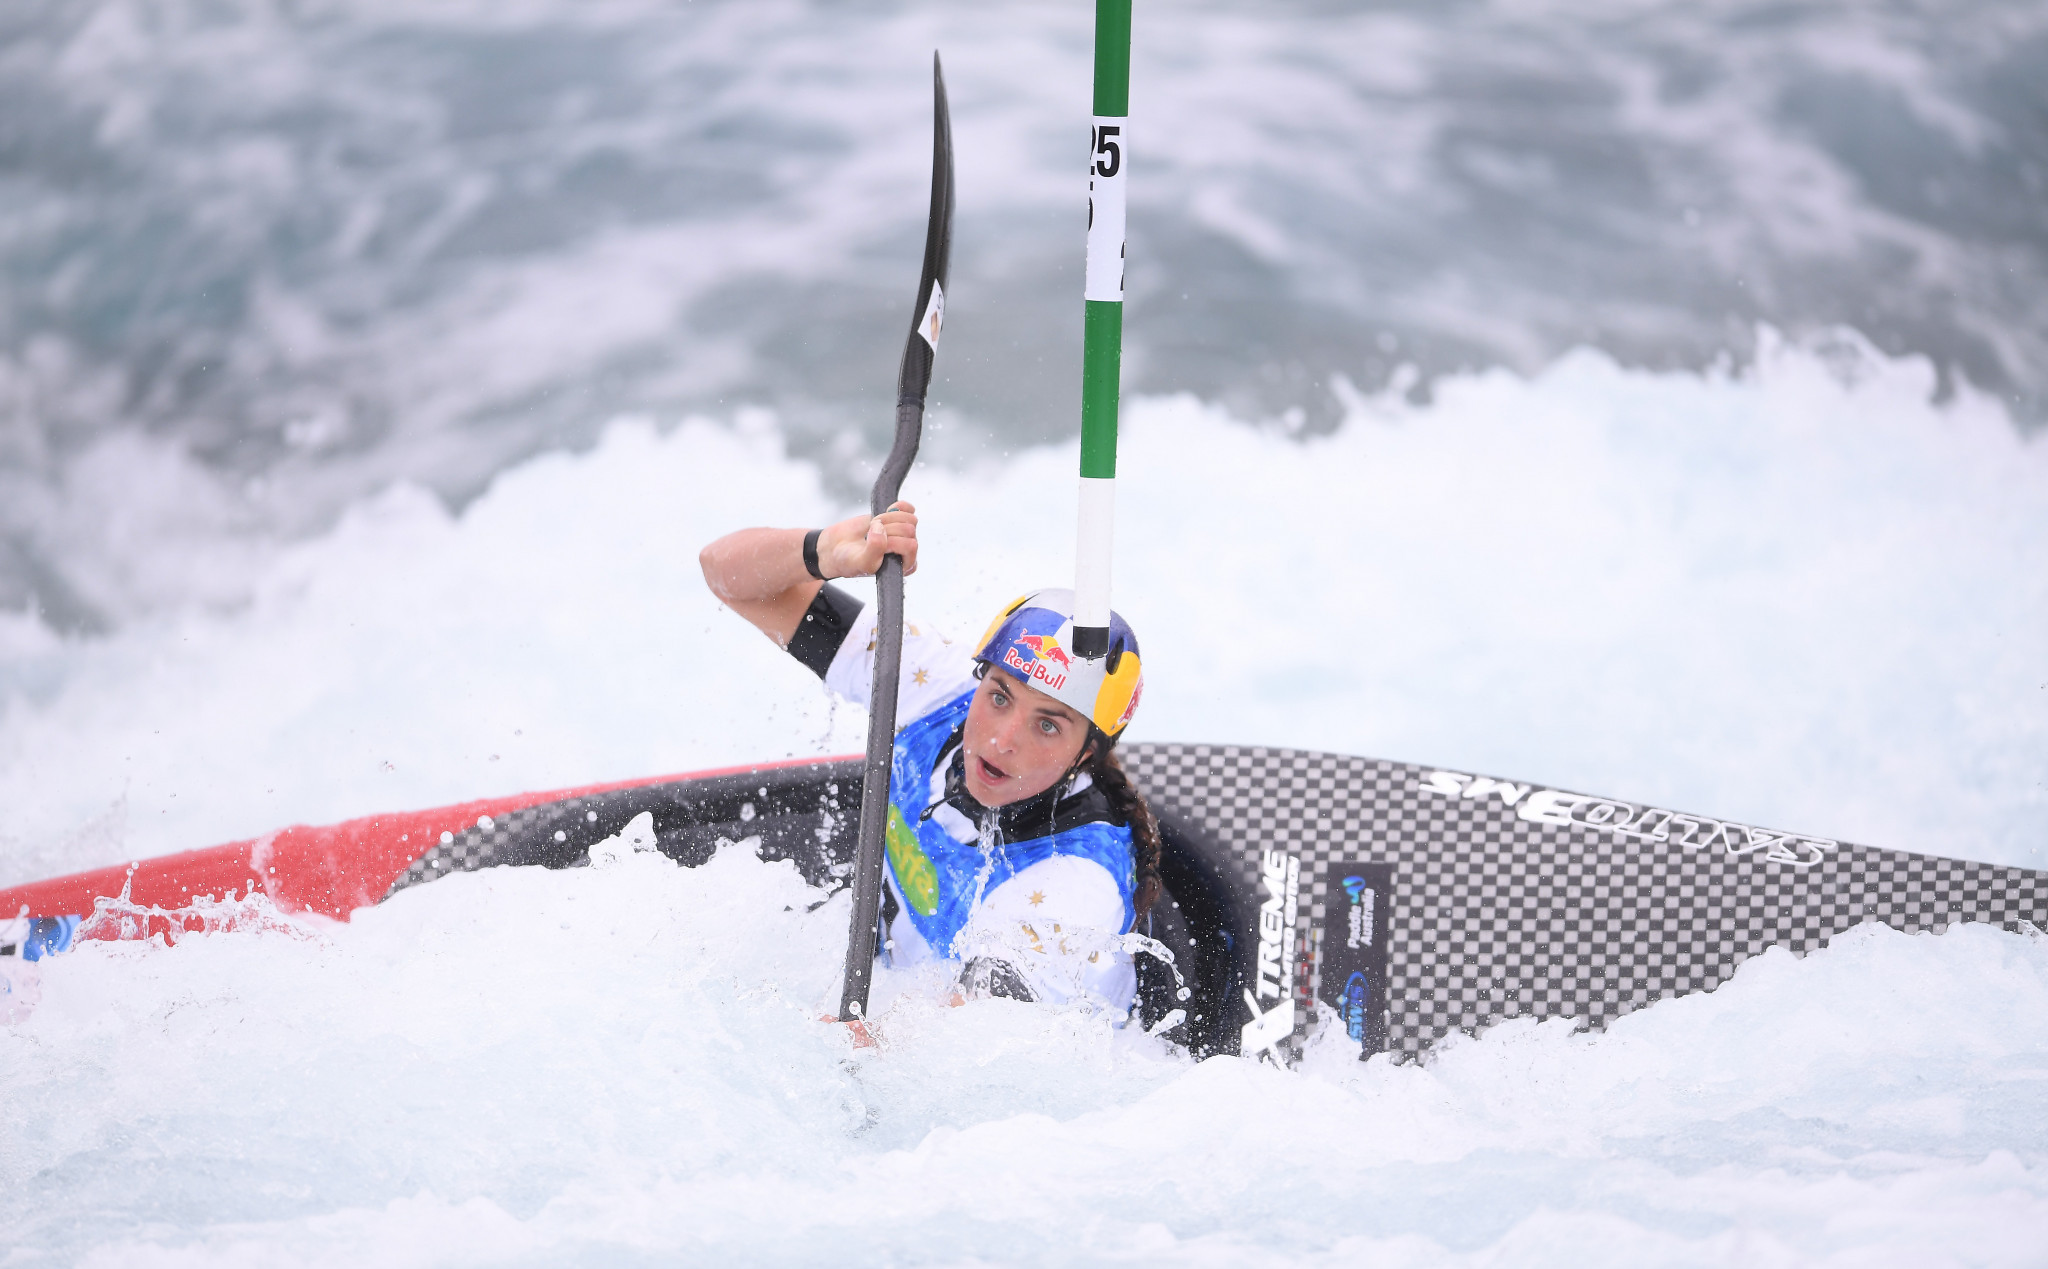 Australian star Jessica Fox was in solid form in the women's C1 and K1 events ©Getty Images